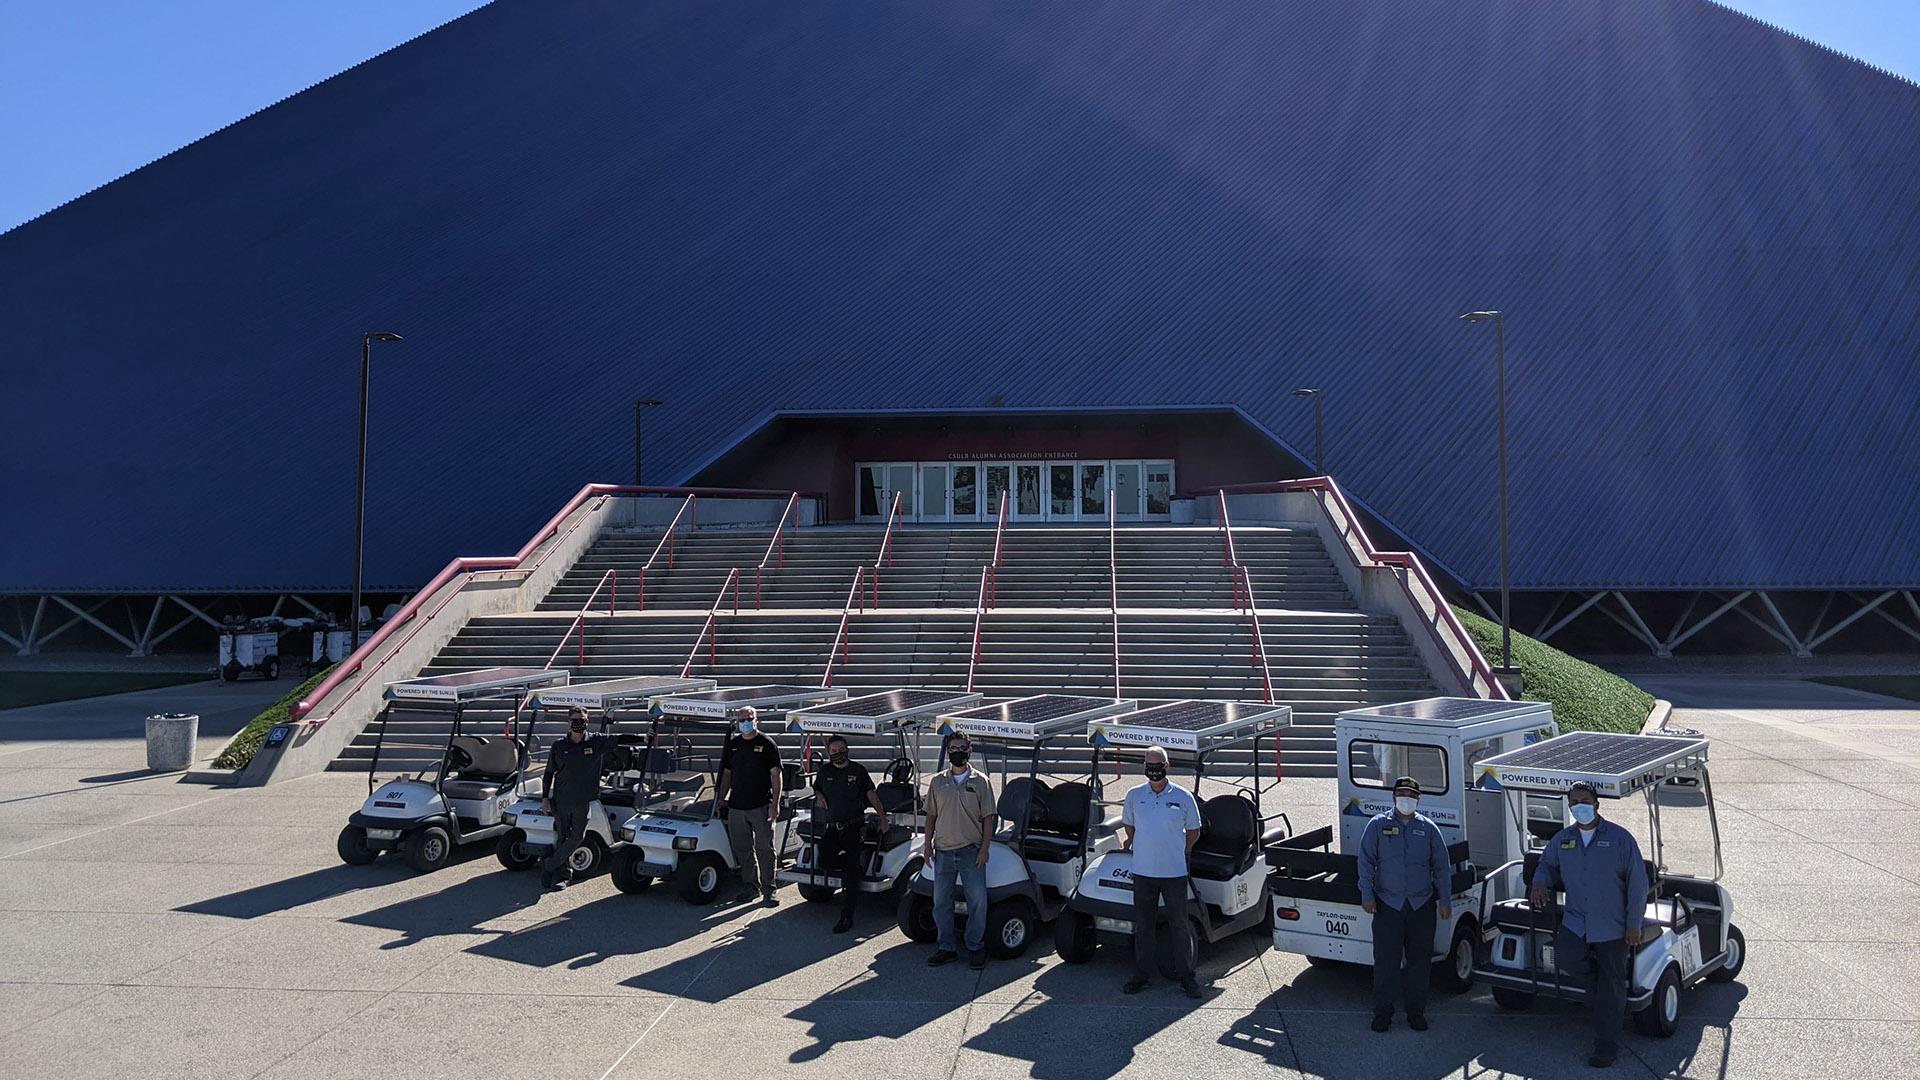 Workers stand beside solar-powered golf carts